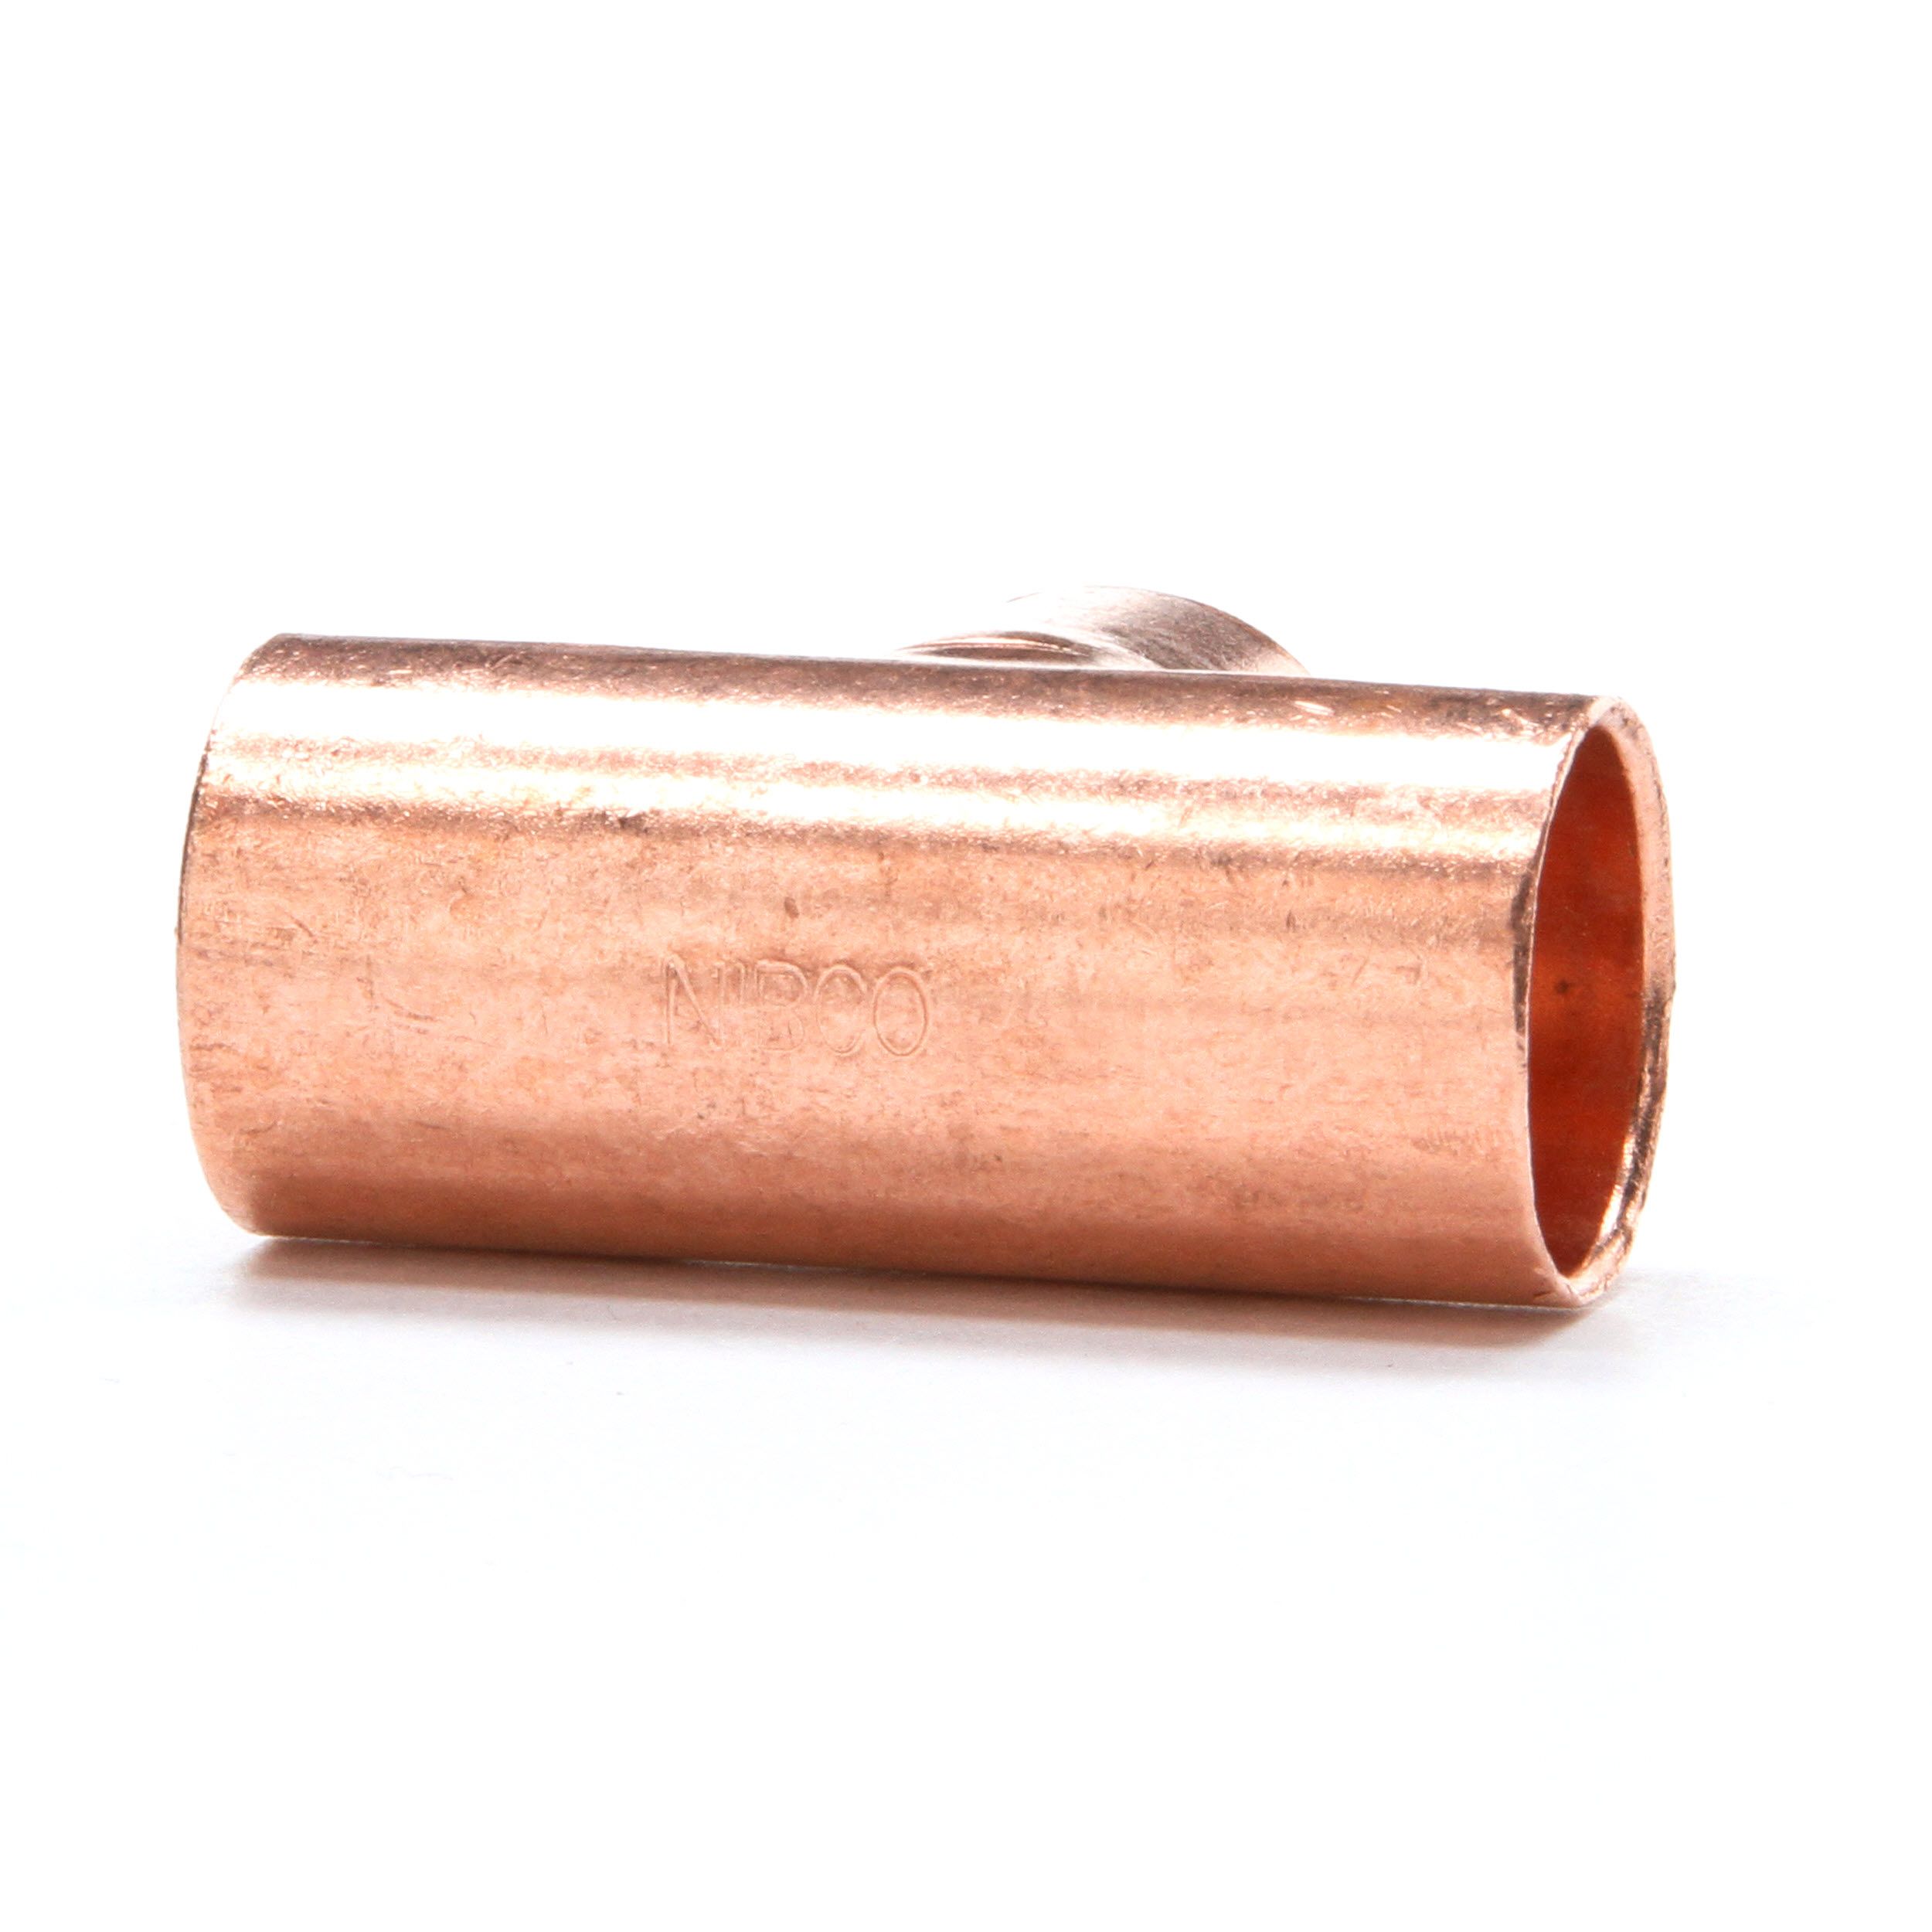 1-1/2" inch Copper Solder Coupling with Stop Sweat  CxC 